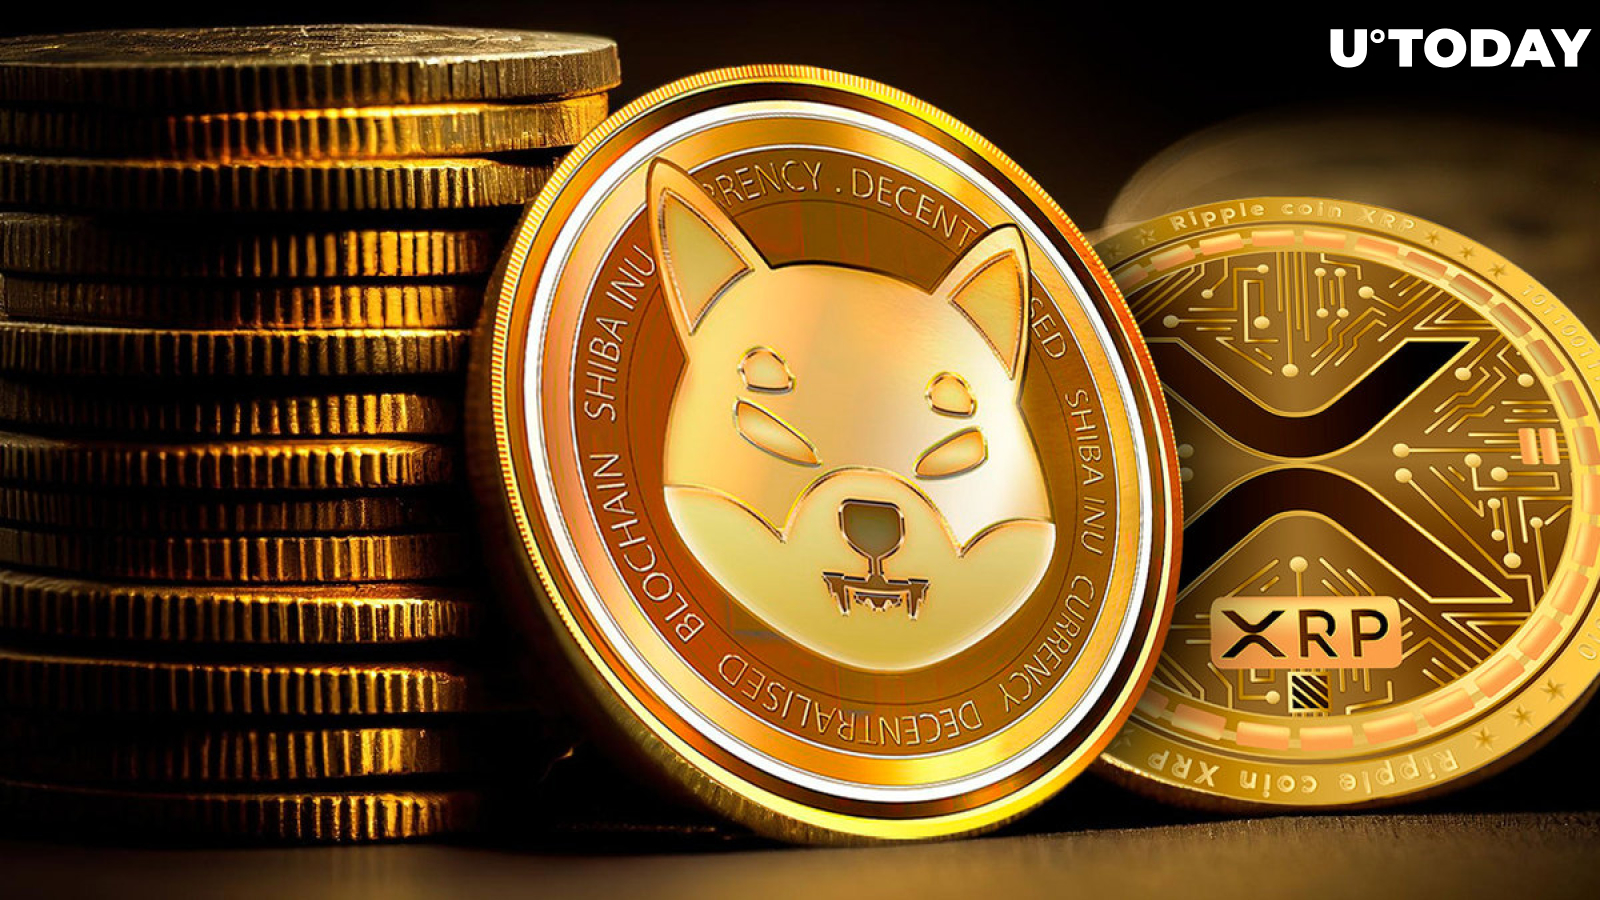 XRP and Shiba Inu (SHIB) Charts New Uptrend Amid Market Recovery